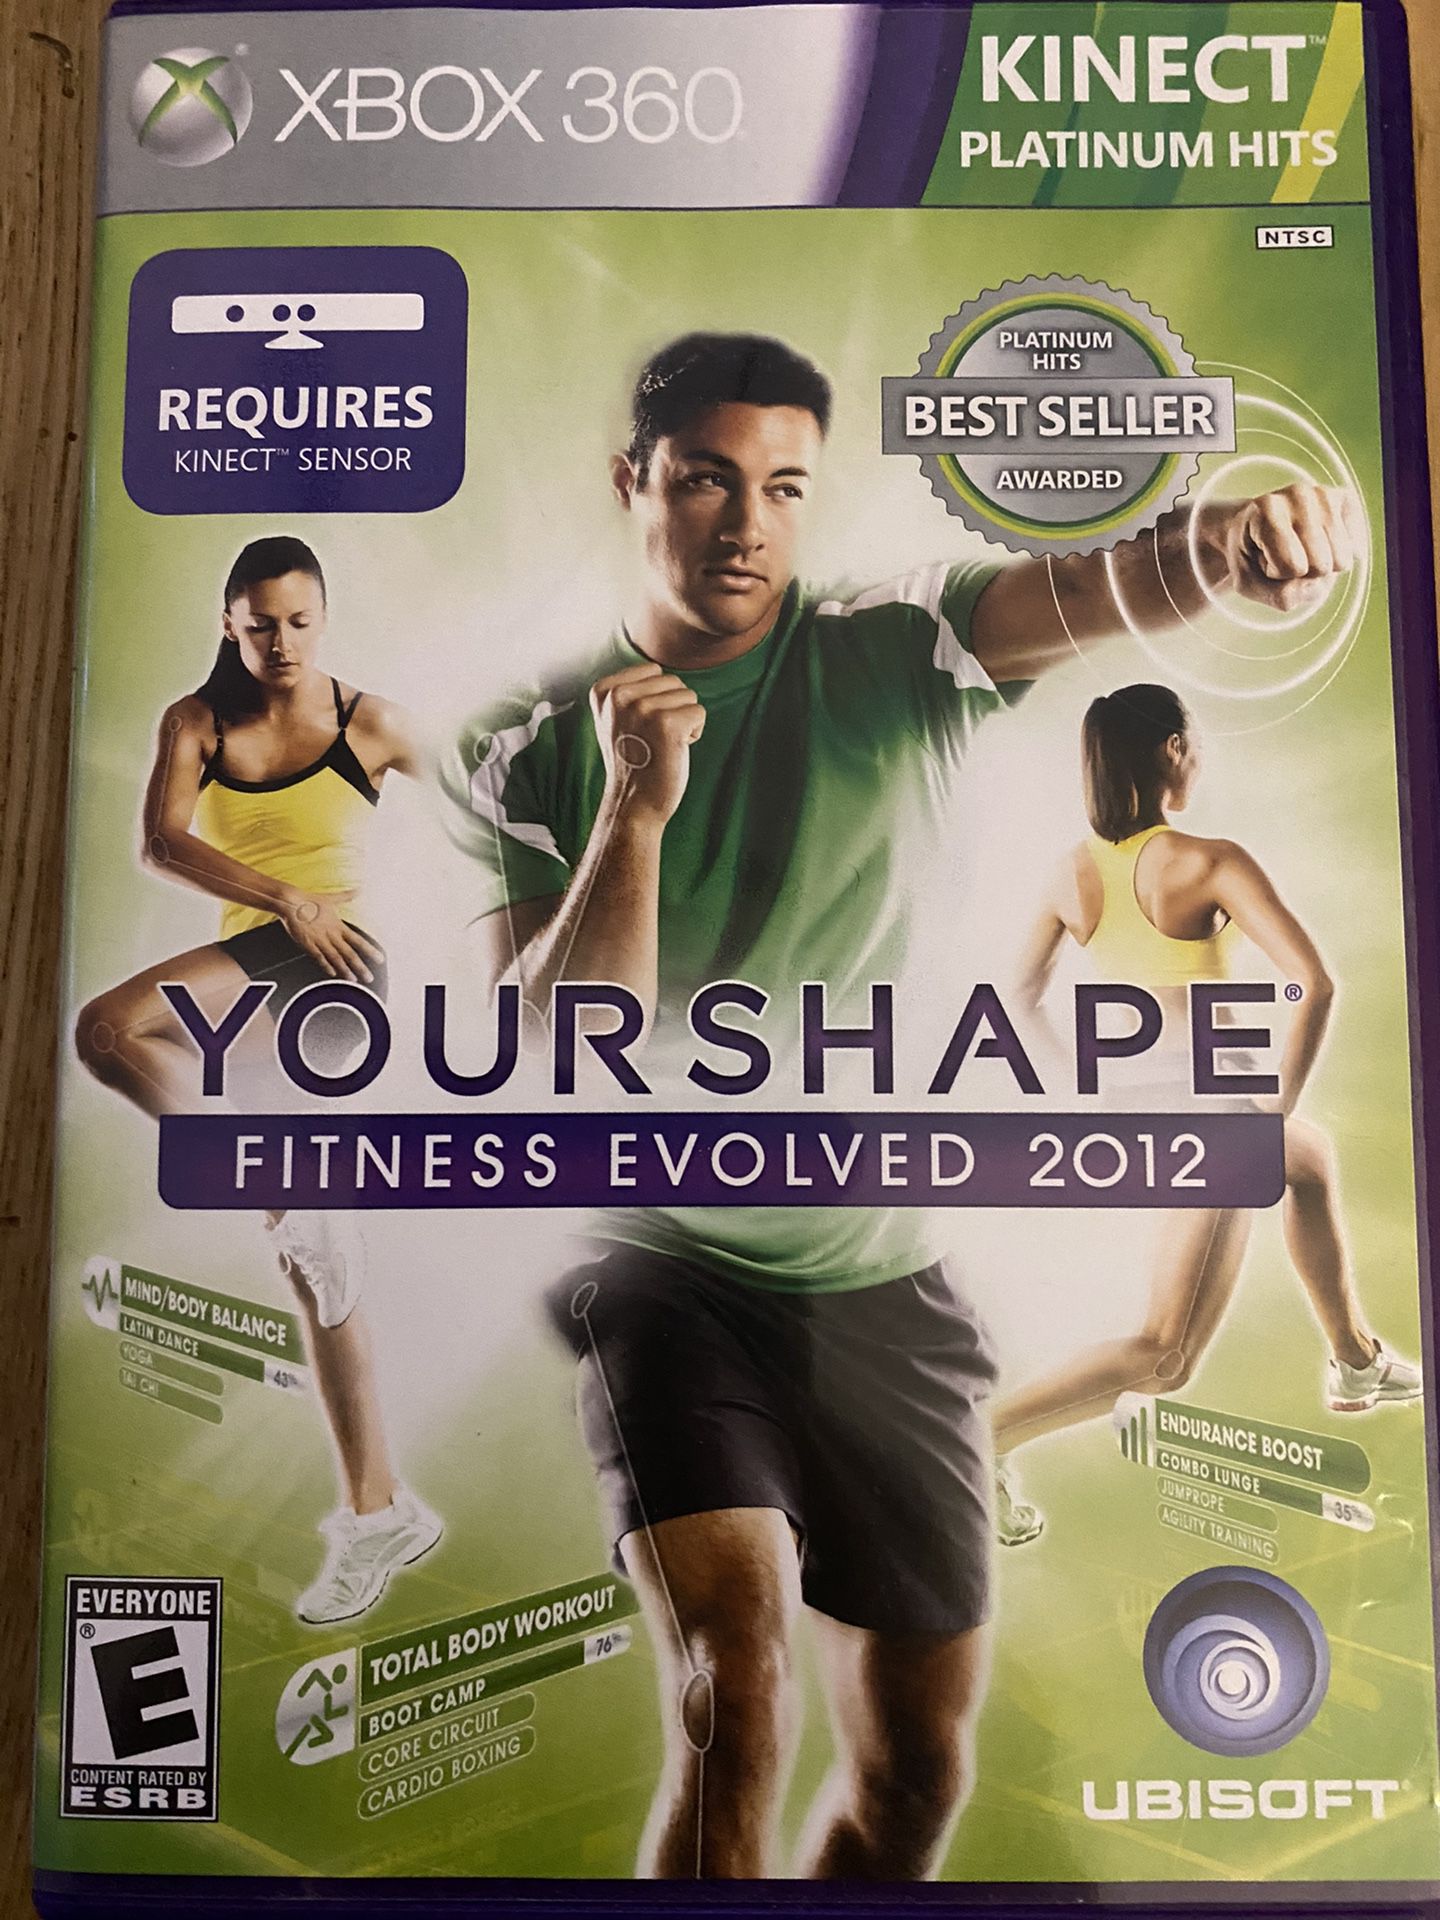 XBOX 360 YourShape (Fitness Evolved) 2012 game